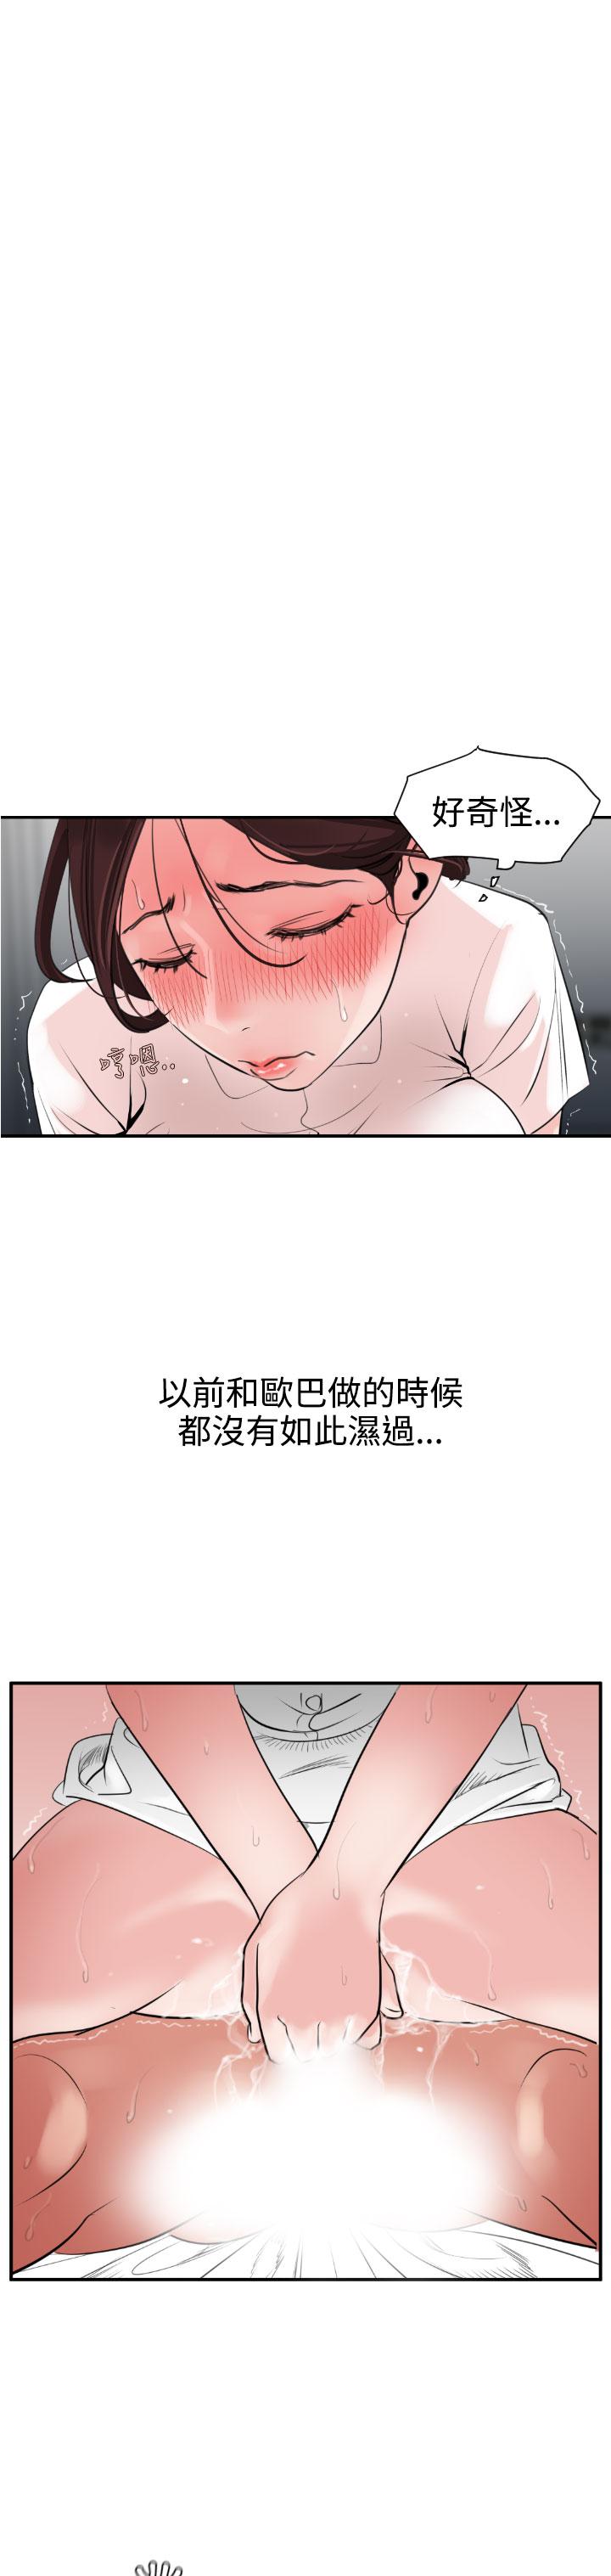 Desire King (慾求王) Ch.1-16 (chinese) 142